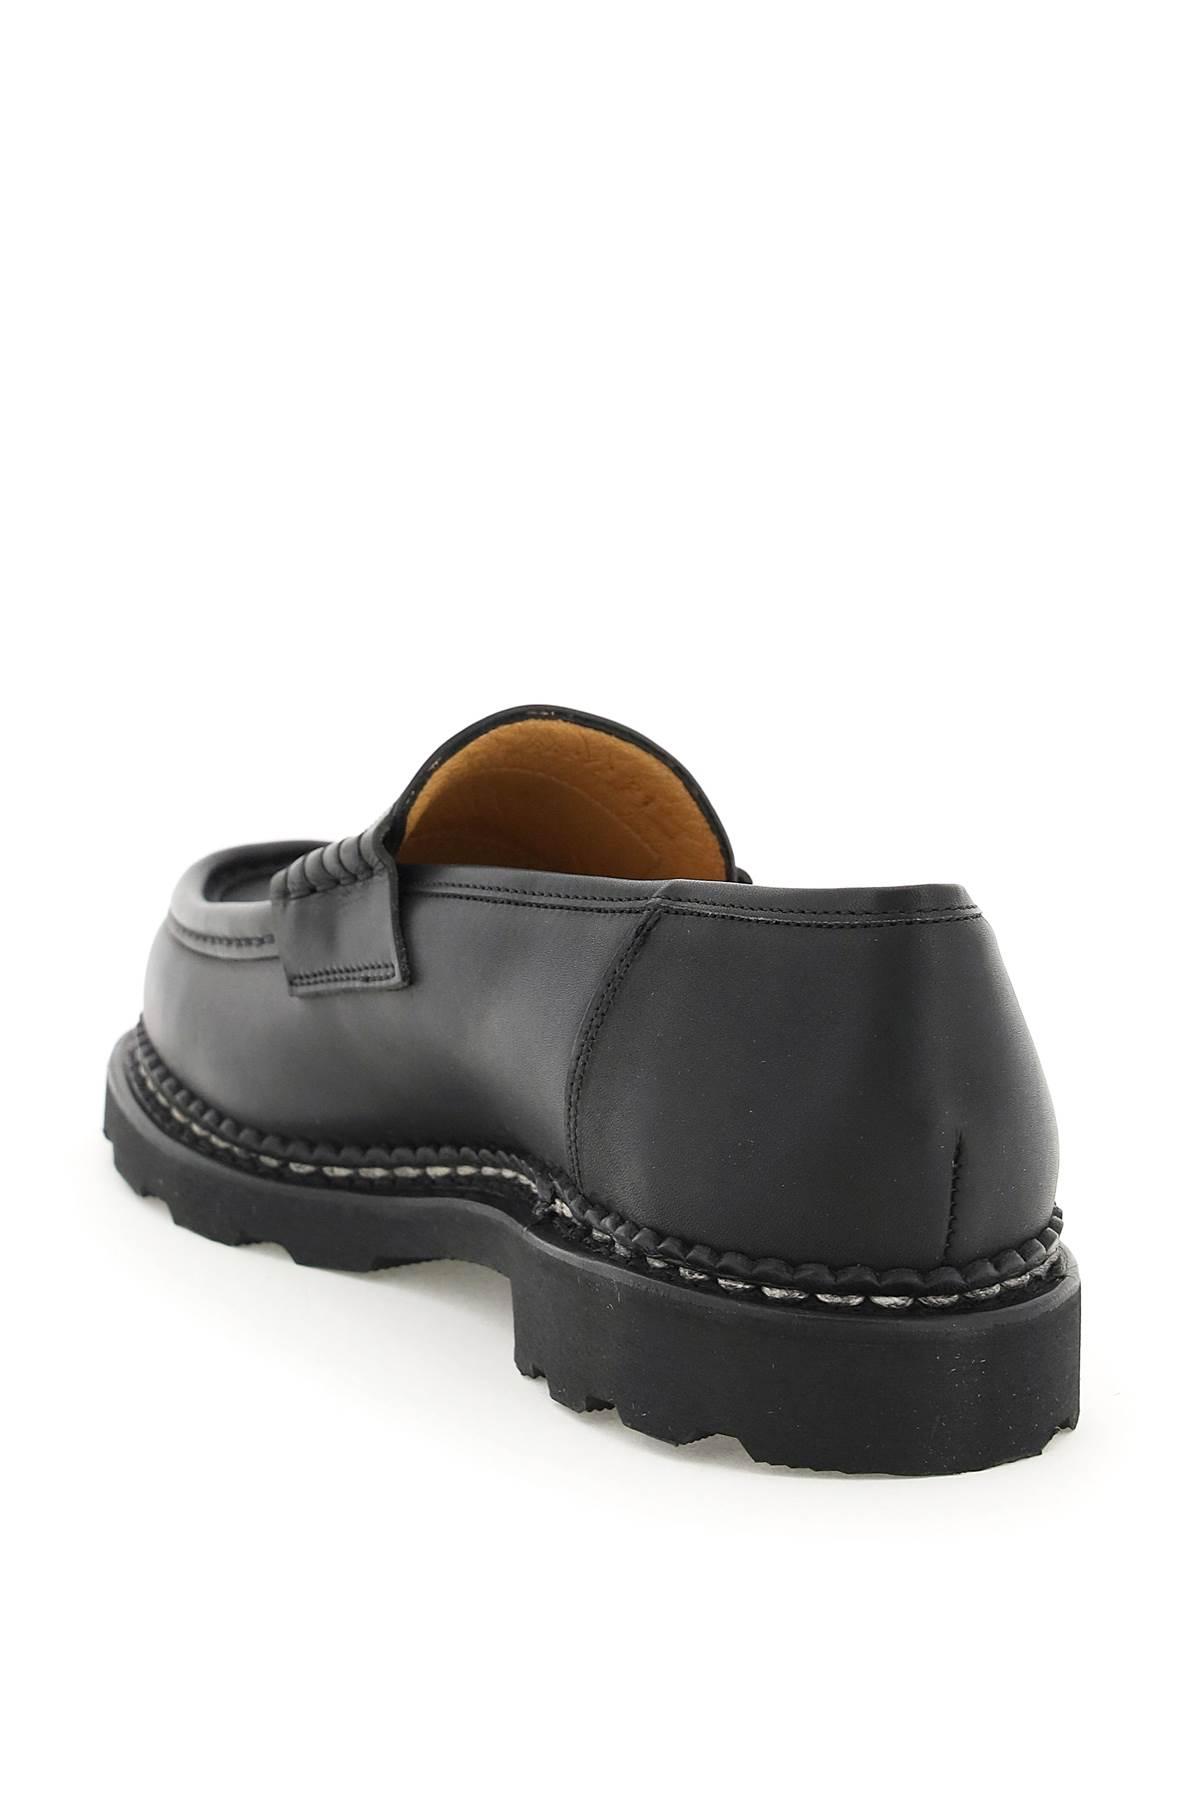 Paraboot Leather Reims Penny Loafers in Black for Men | Lyst